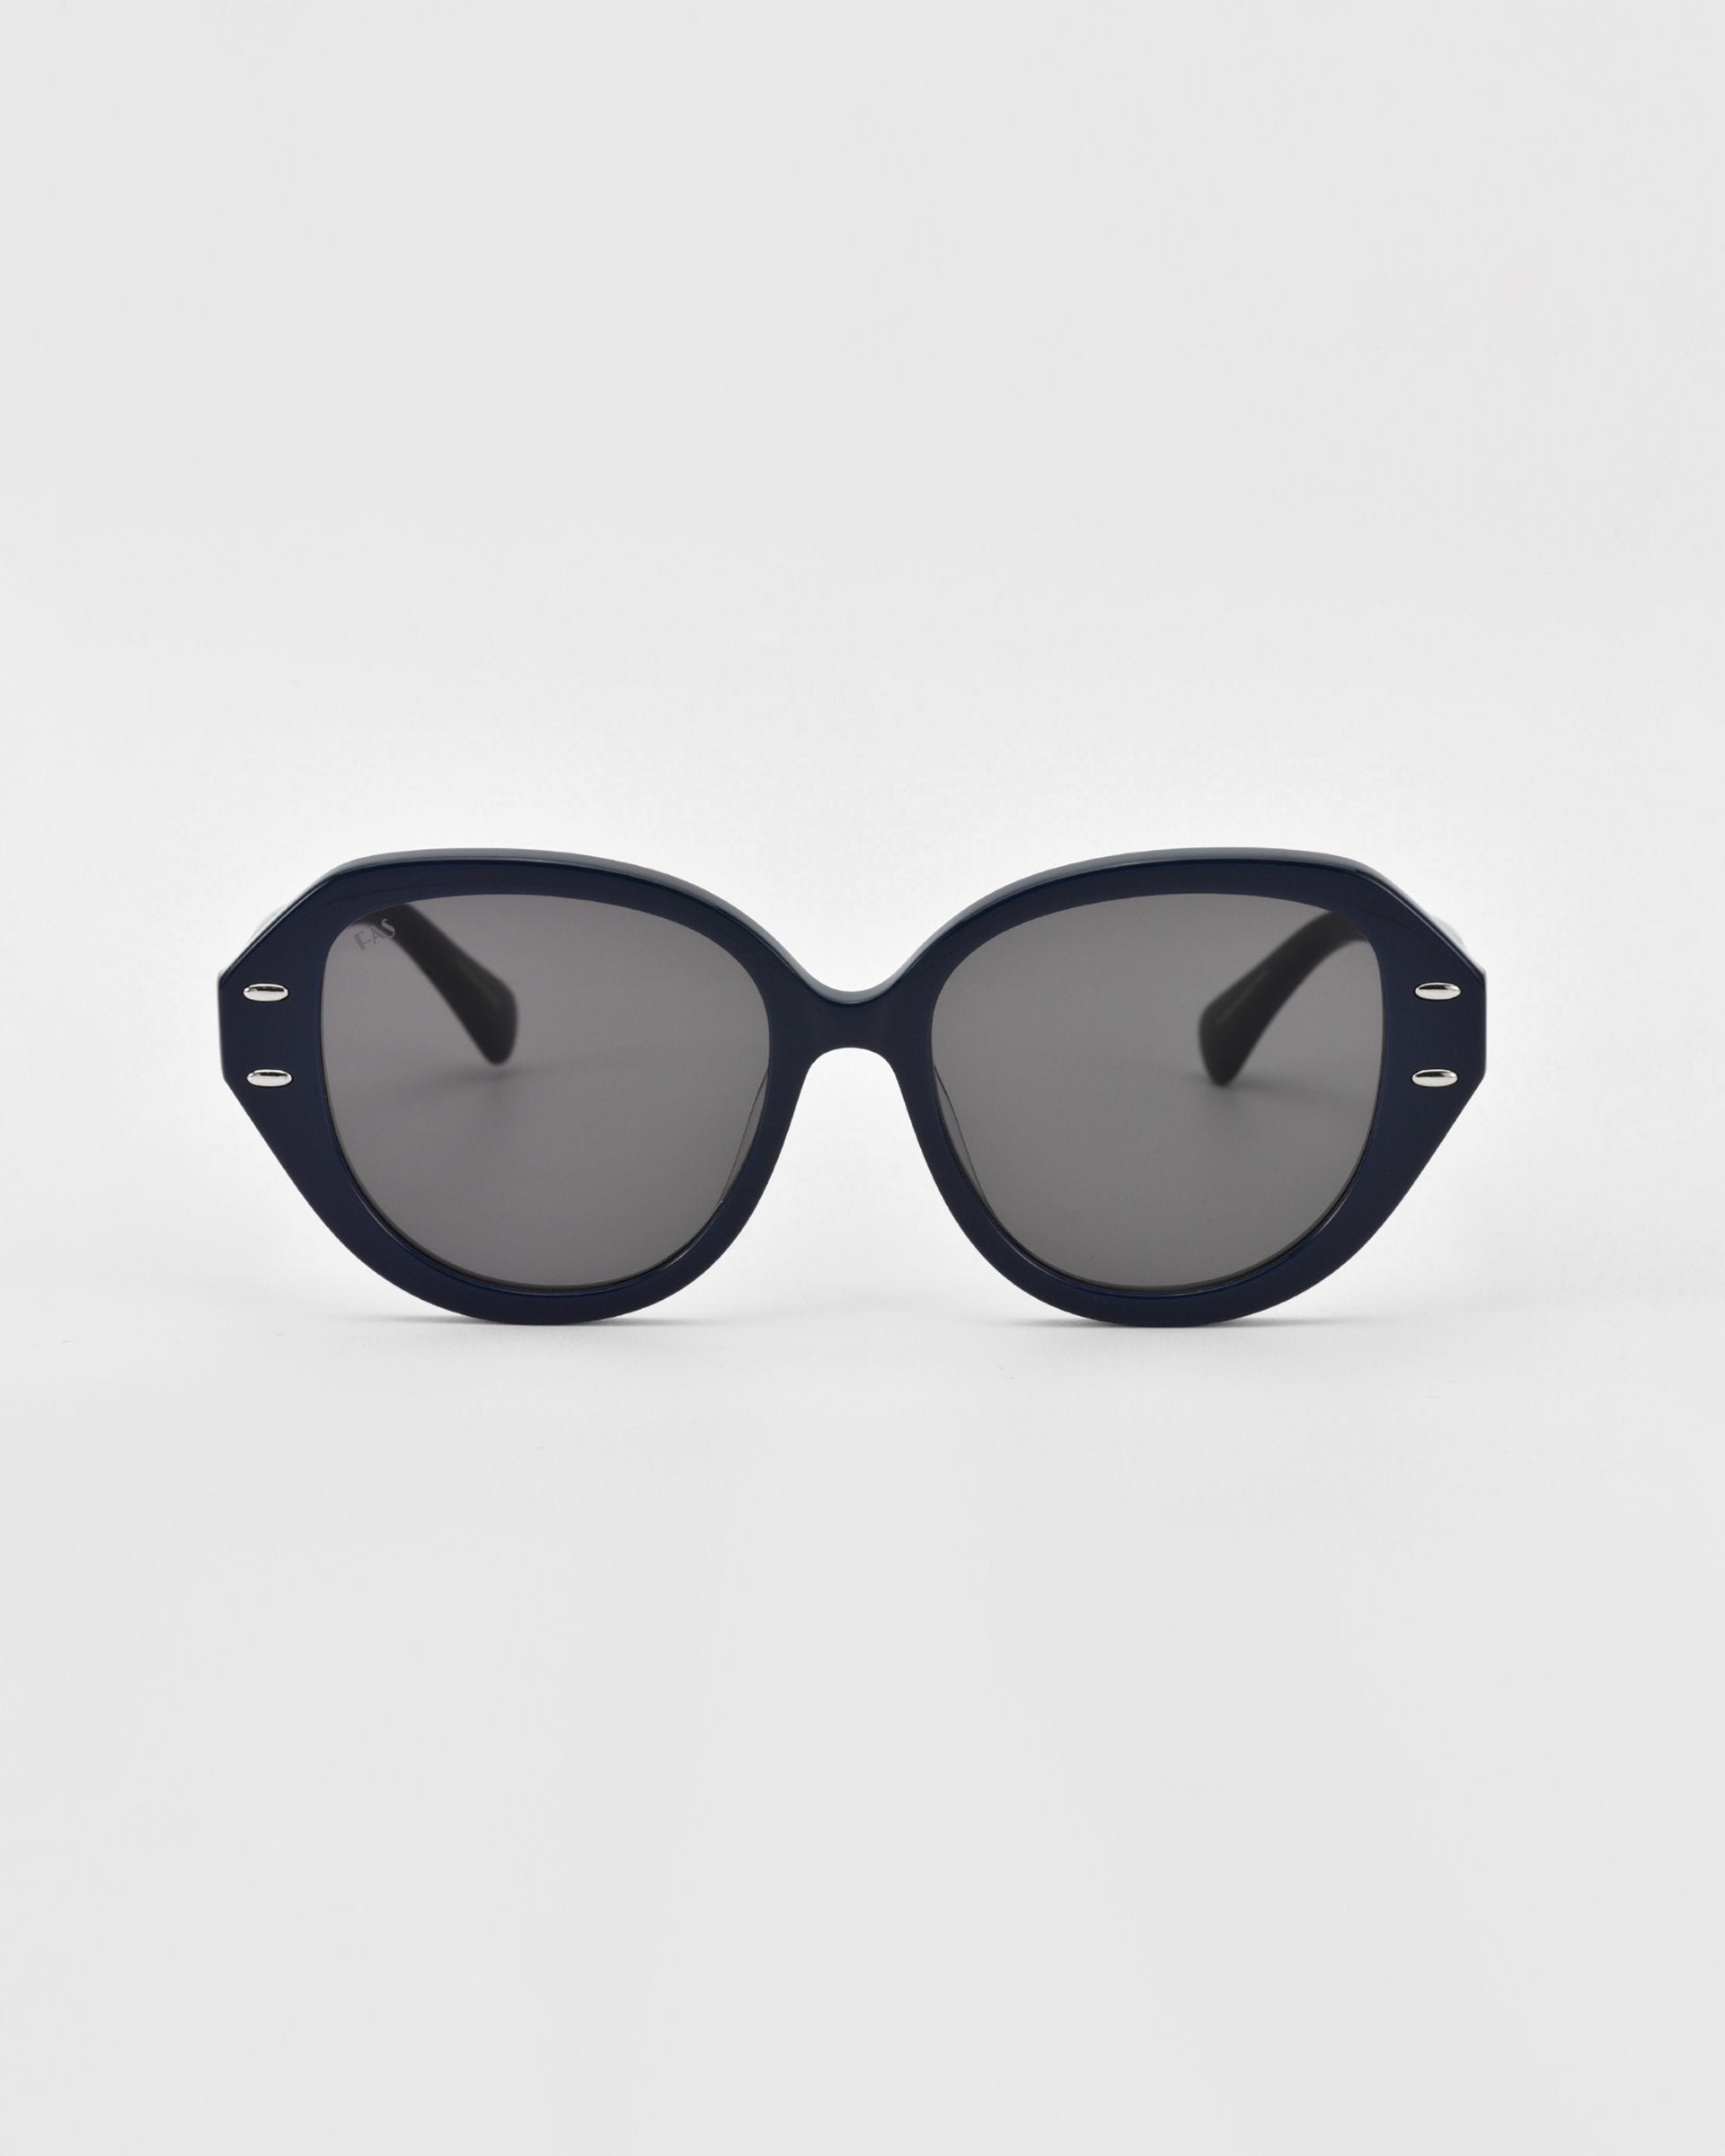 A pair of black oval Mirage sunglasses with dark lenses and a matte black frame made from plant-based acetate by For Art's Sake®. The frame has small metallic accents near the hinges and sturdy black arms. The Mirage sunglasses are placed on a white background.